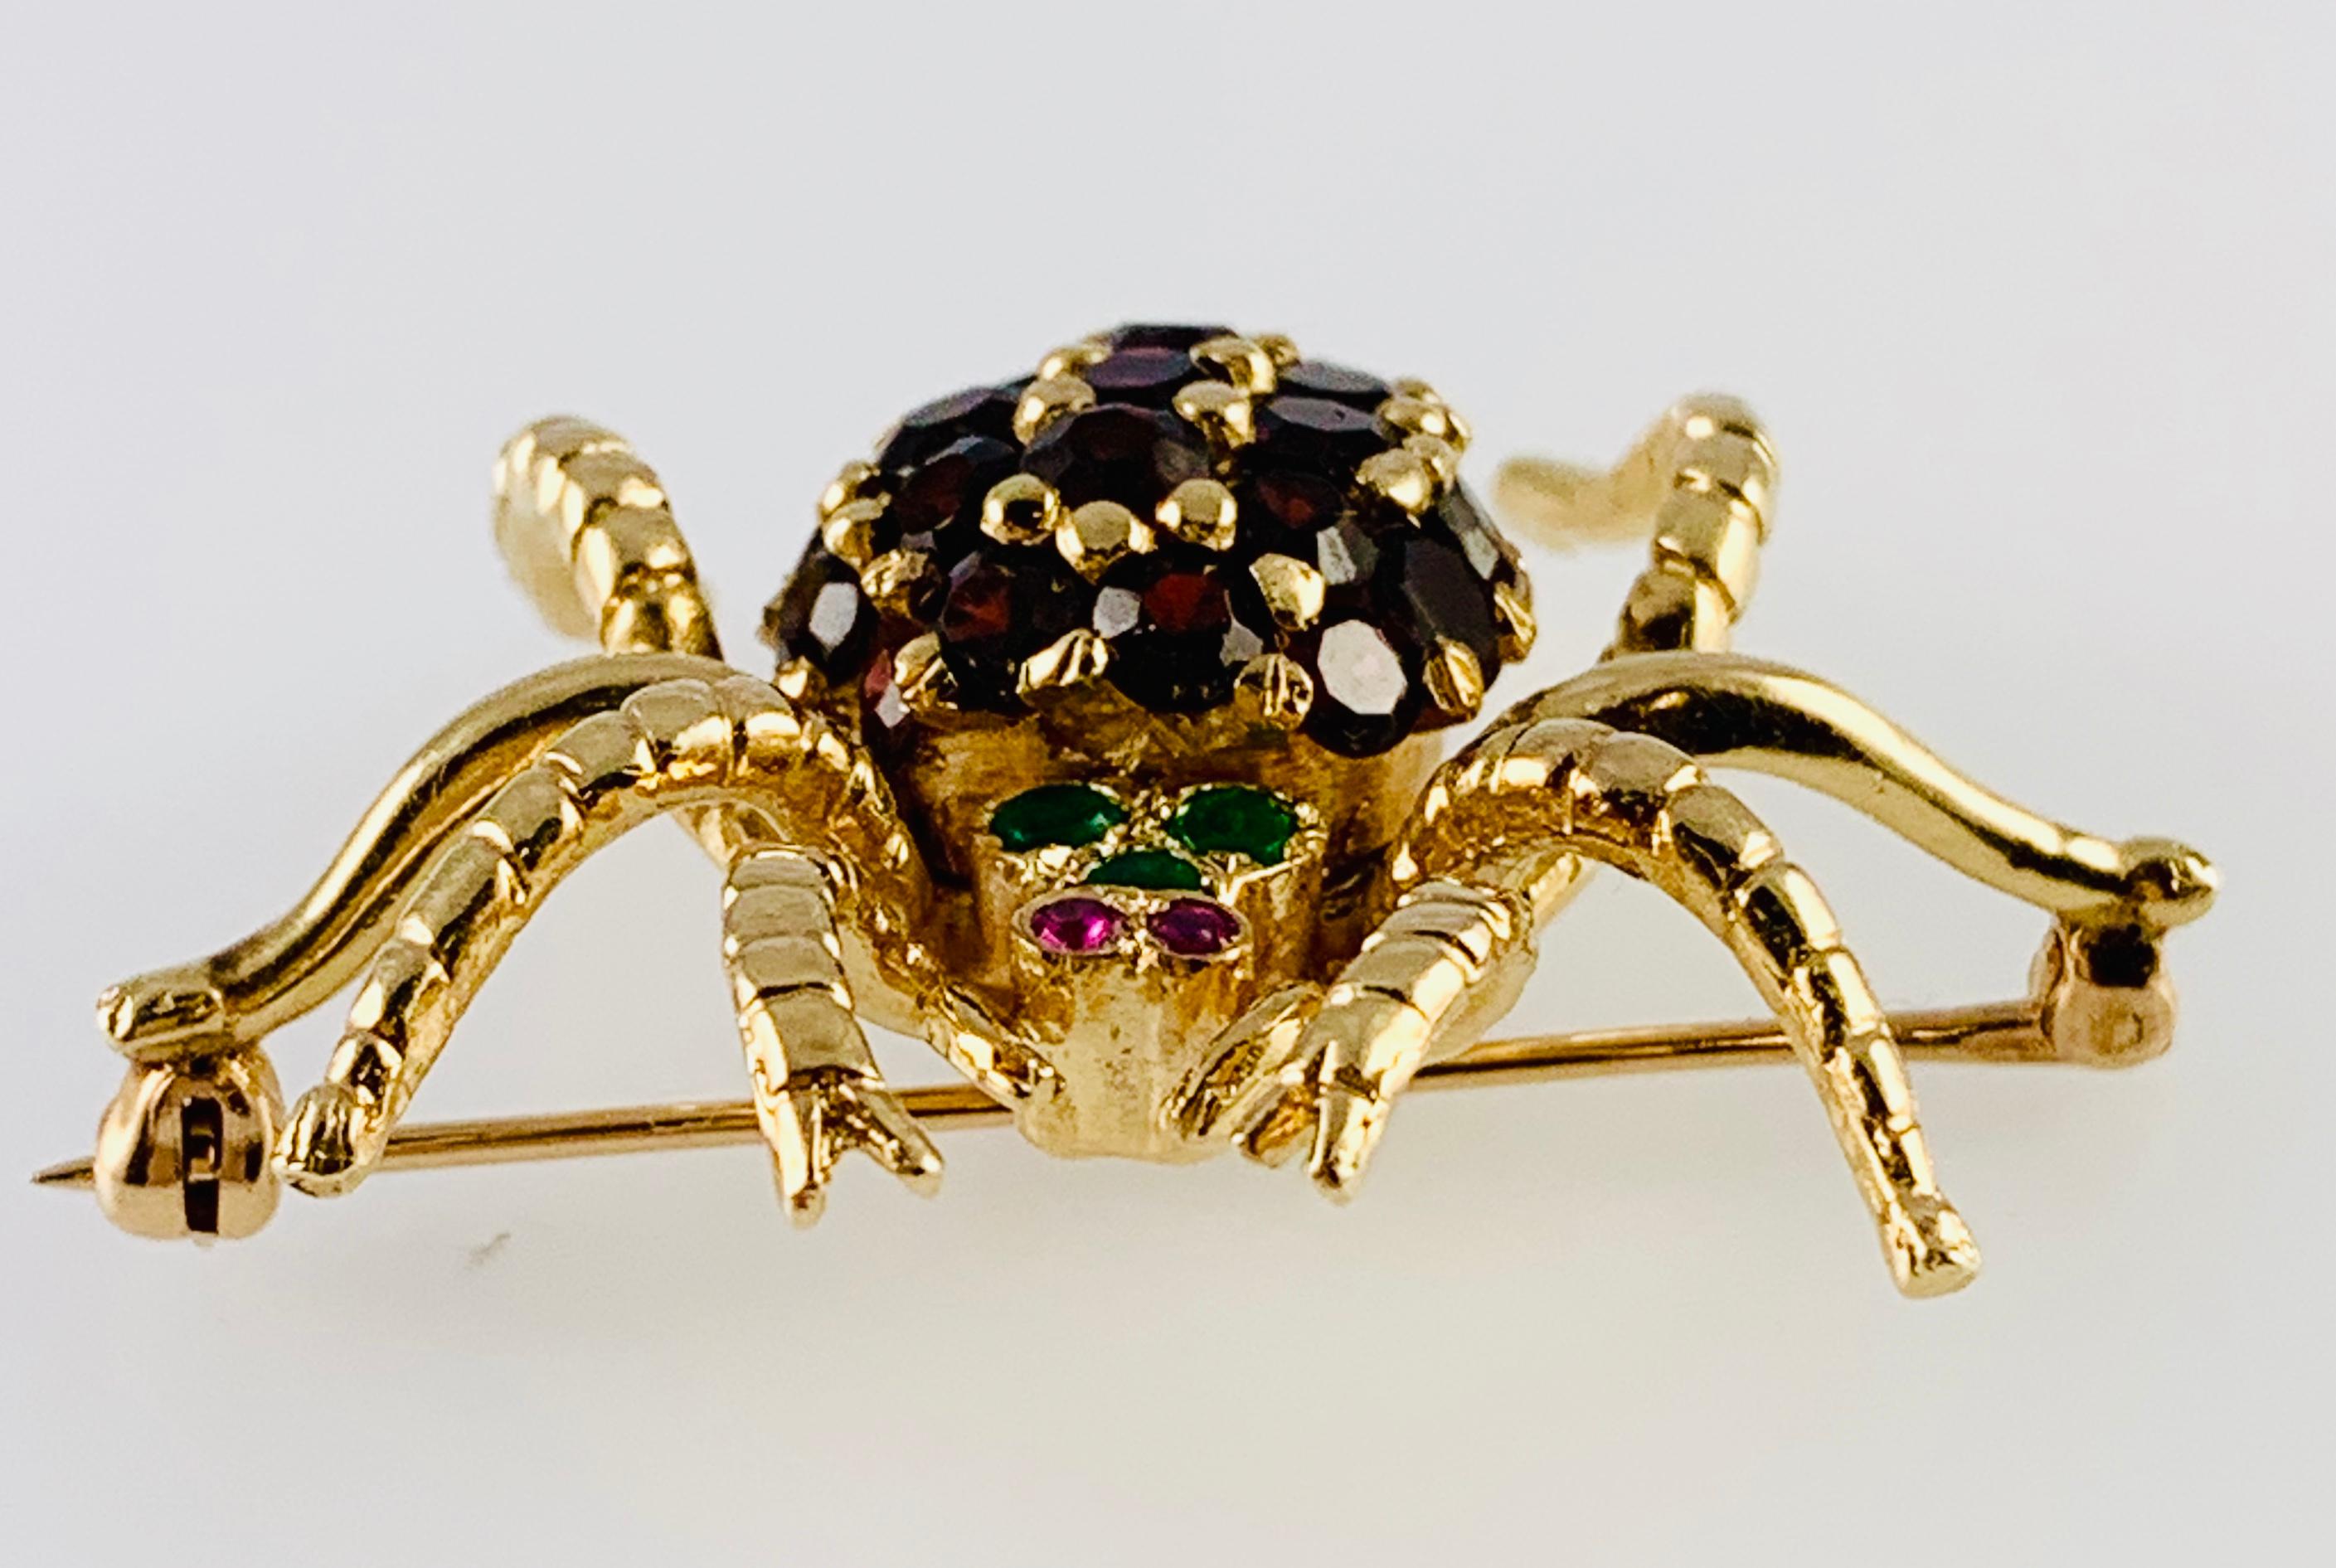 Beautiful & Whimsical Vintage Spider Brooch / Pin! Made in 14K yellow Gold with Garnets for the body, Ruby eyes and three Emeralds as well! It measures 1.25 inches by 1.5 inches and weighs 11.4 grams.